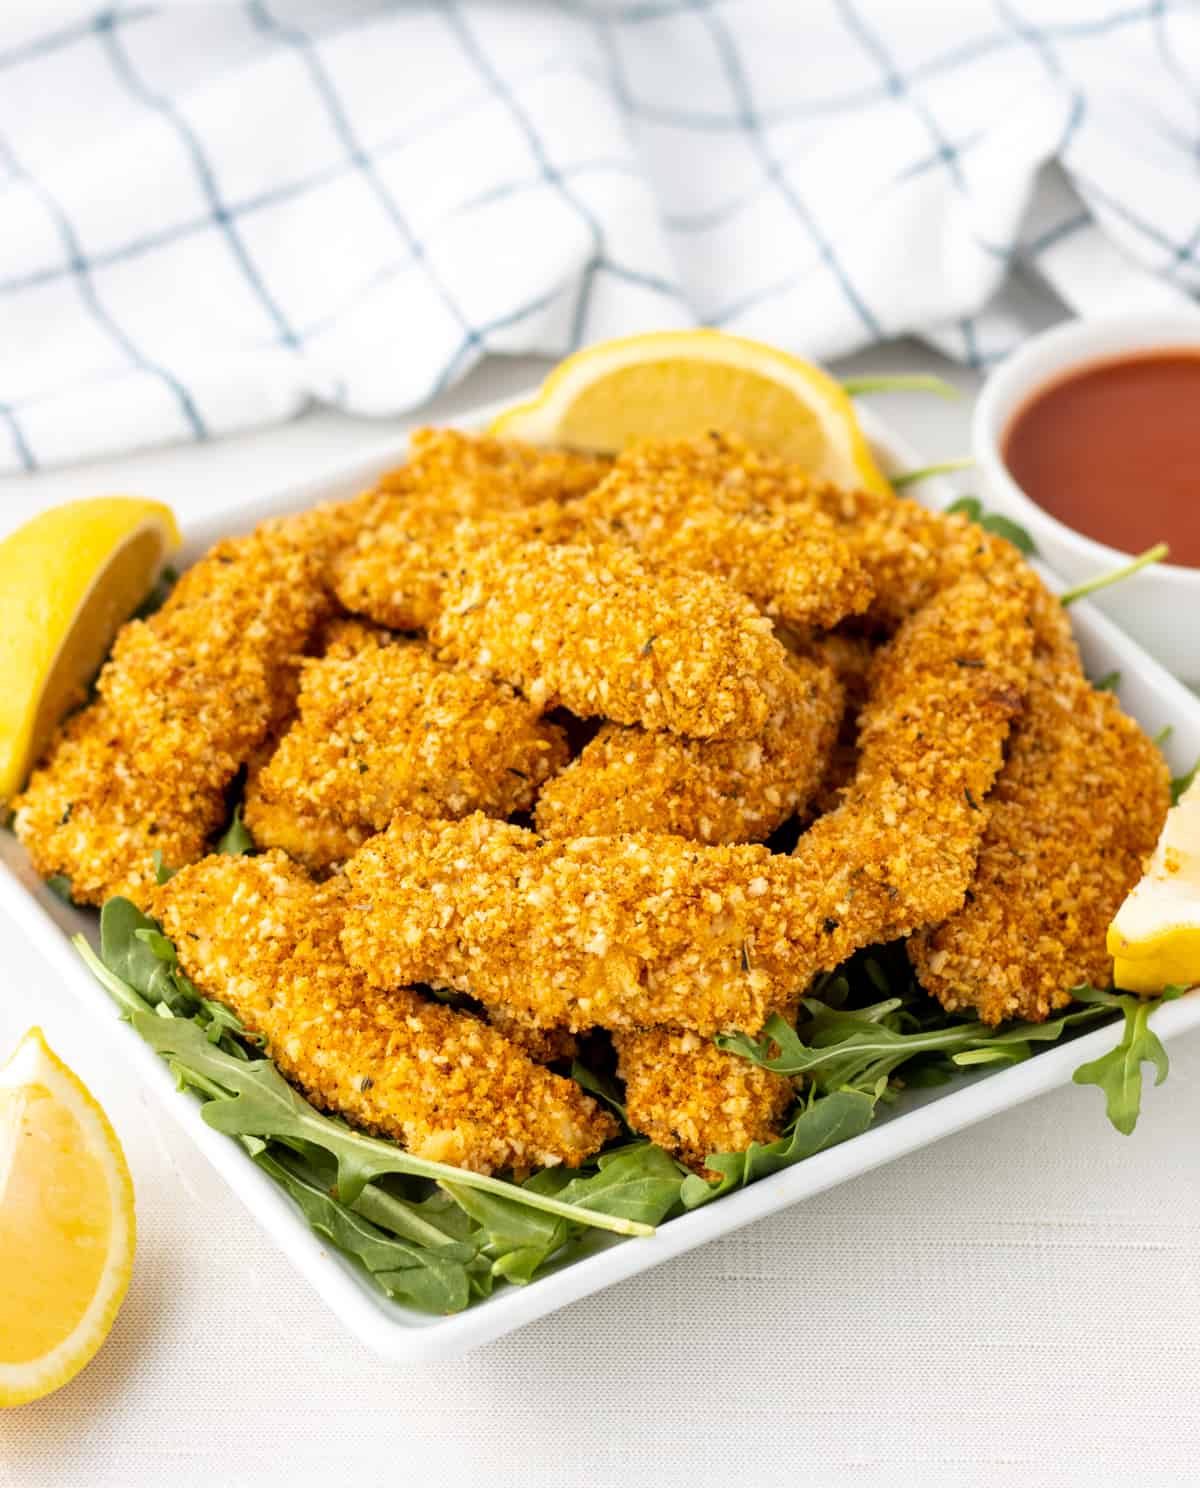 Panko crusted chicken strips on a plate with lemon wedges next to a bowl of sauce.